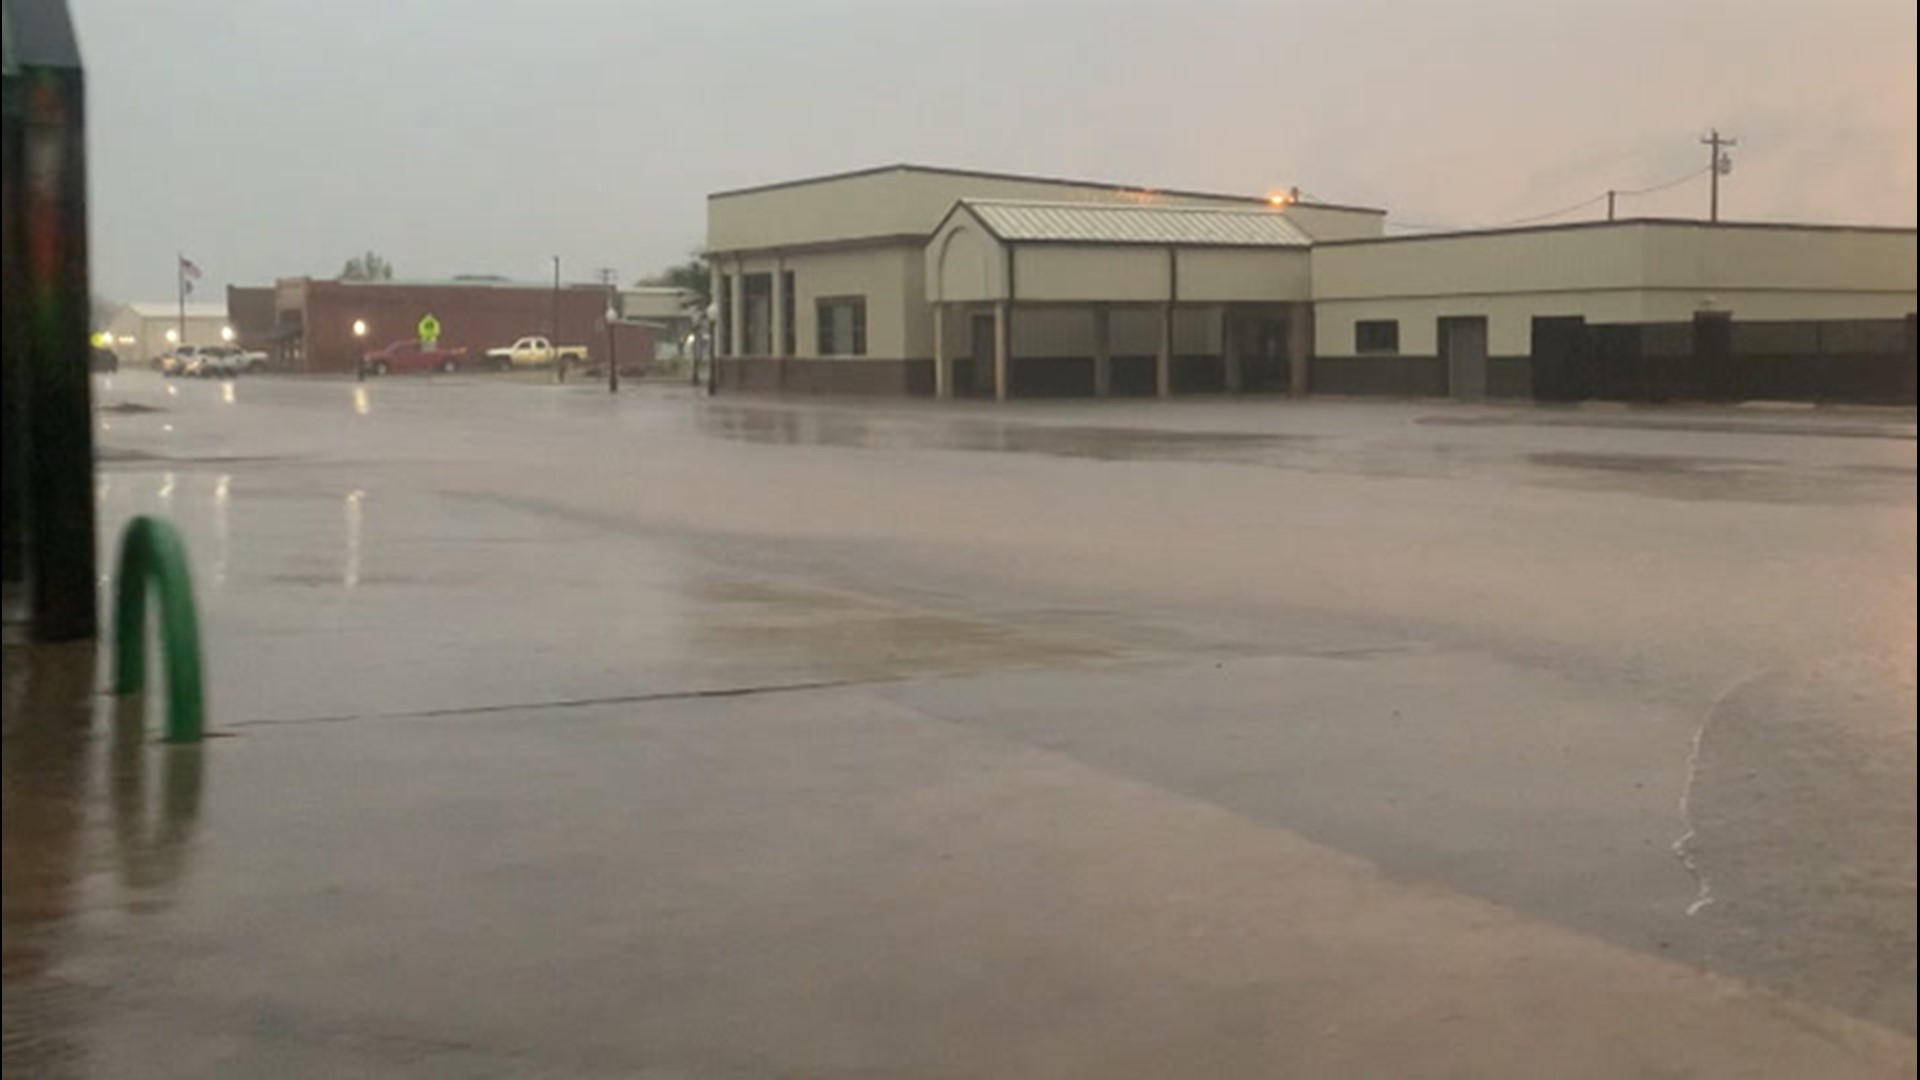 AccuWeather's Bill Wadell travelled through several towns in Oklahoma as numerous storms, some tornado-warned, brought heavy rain, flooding and lightning on April 27.